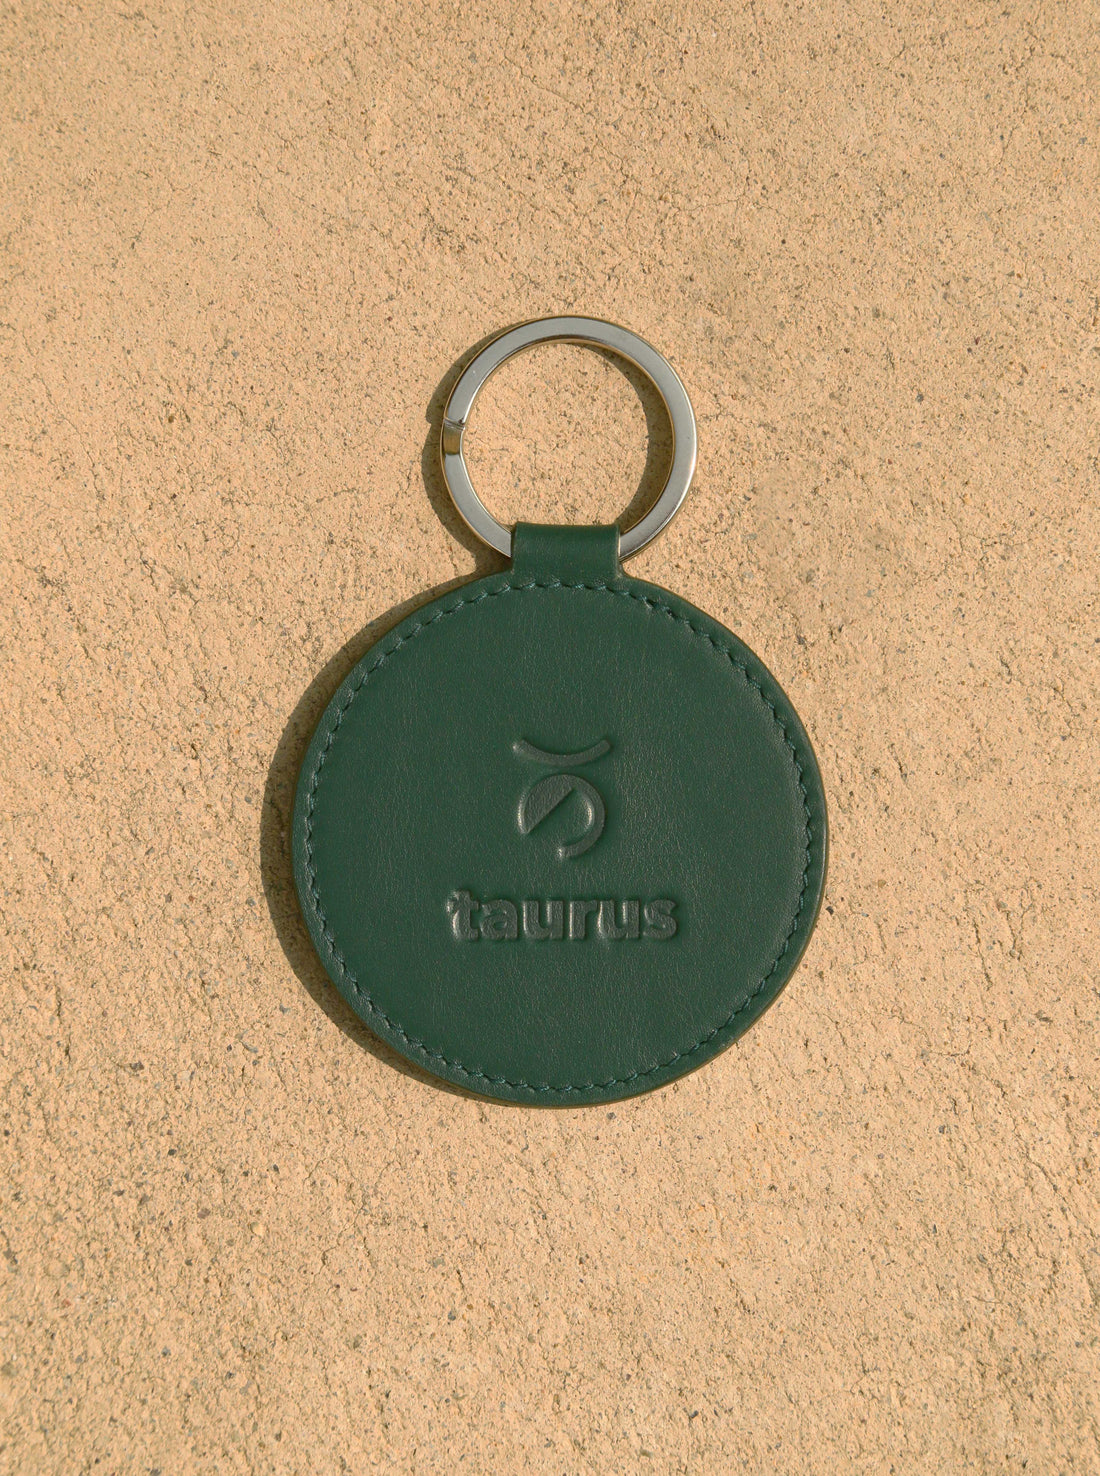 DOOZ Taurus keychain key tag embossed green leather made in los angeles